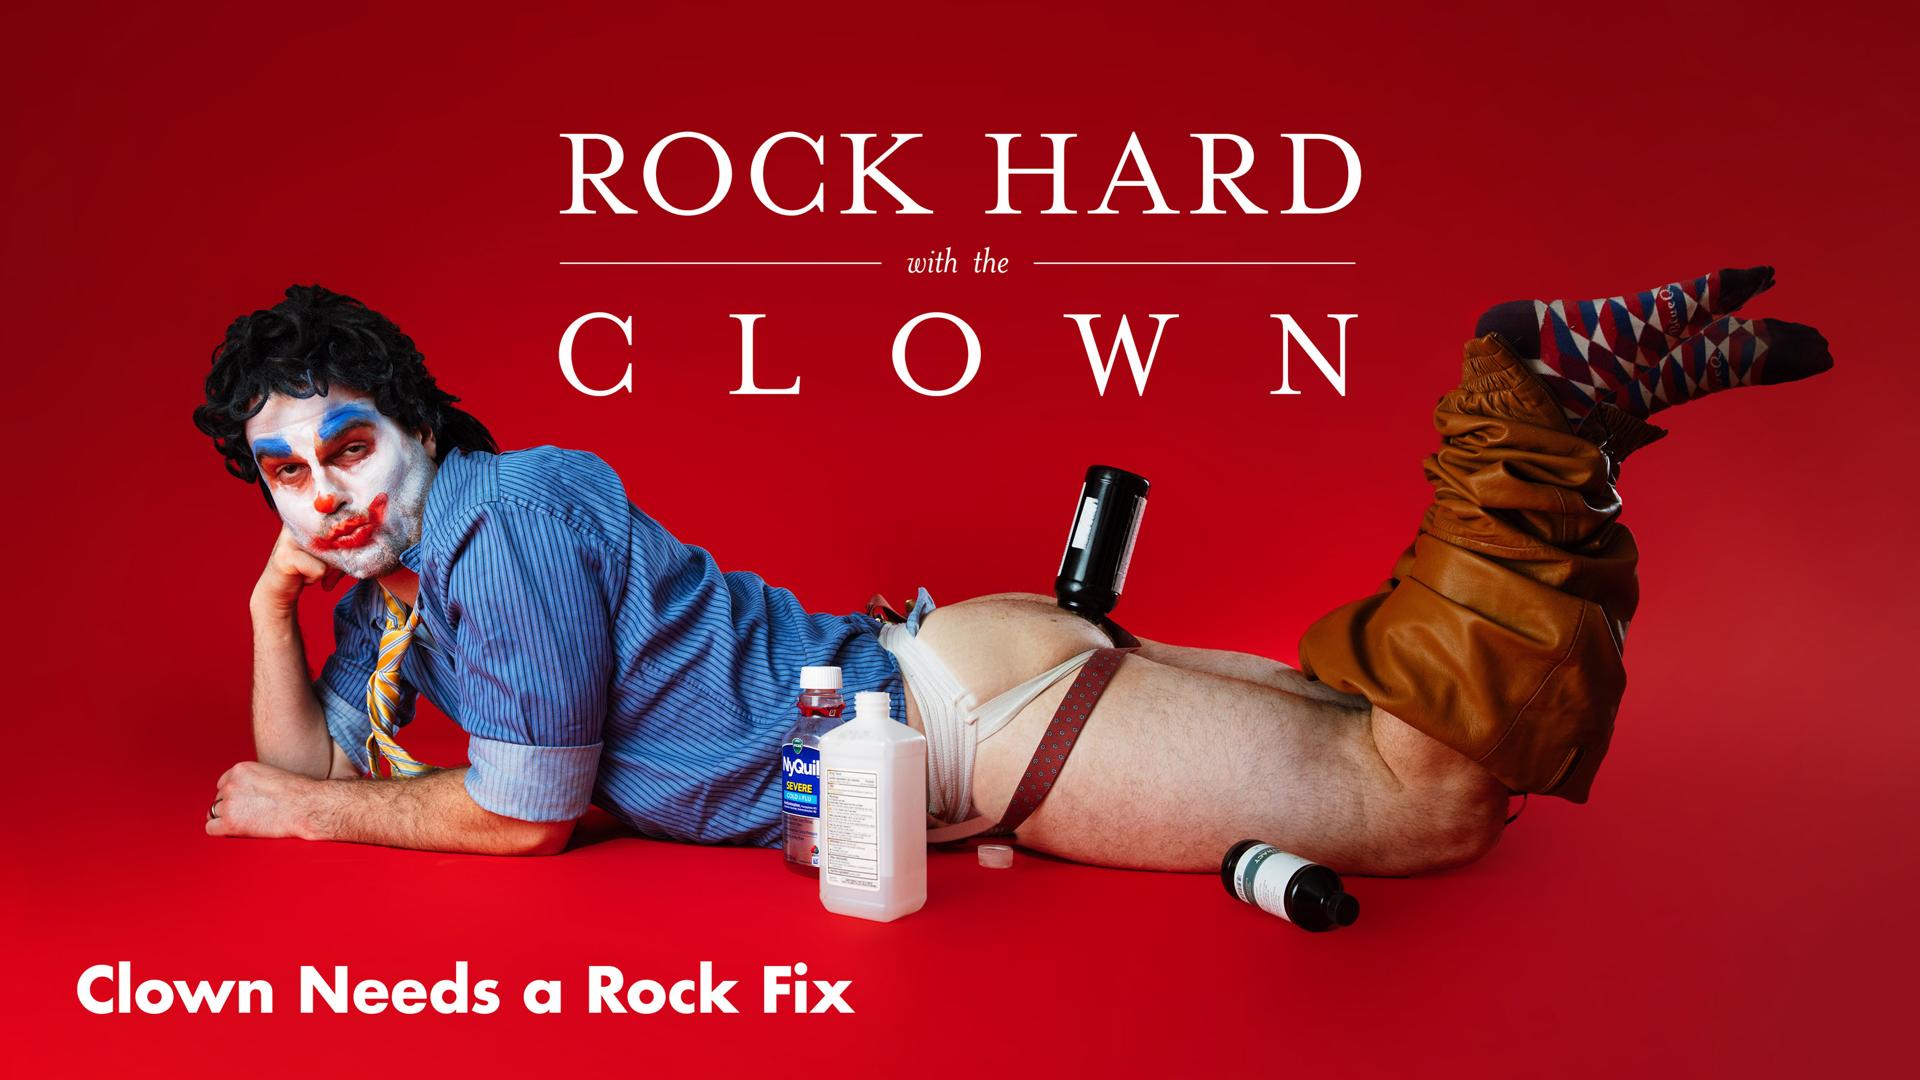 Rock Hard with the Clown